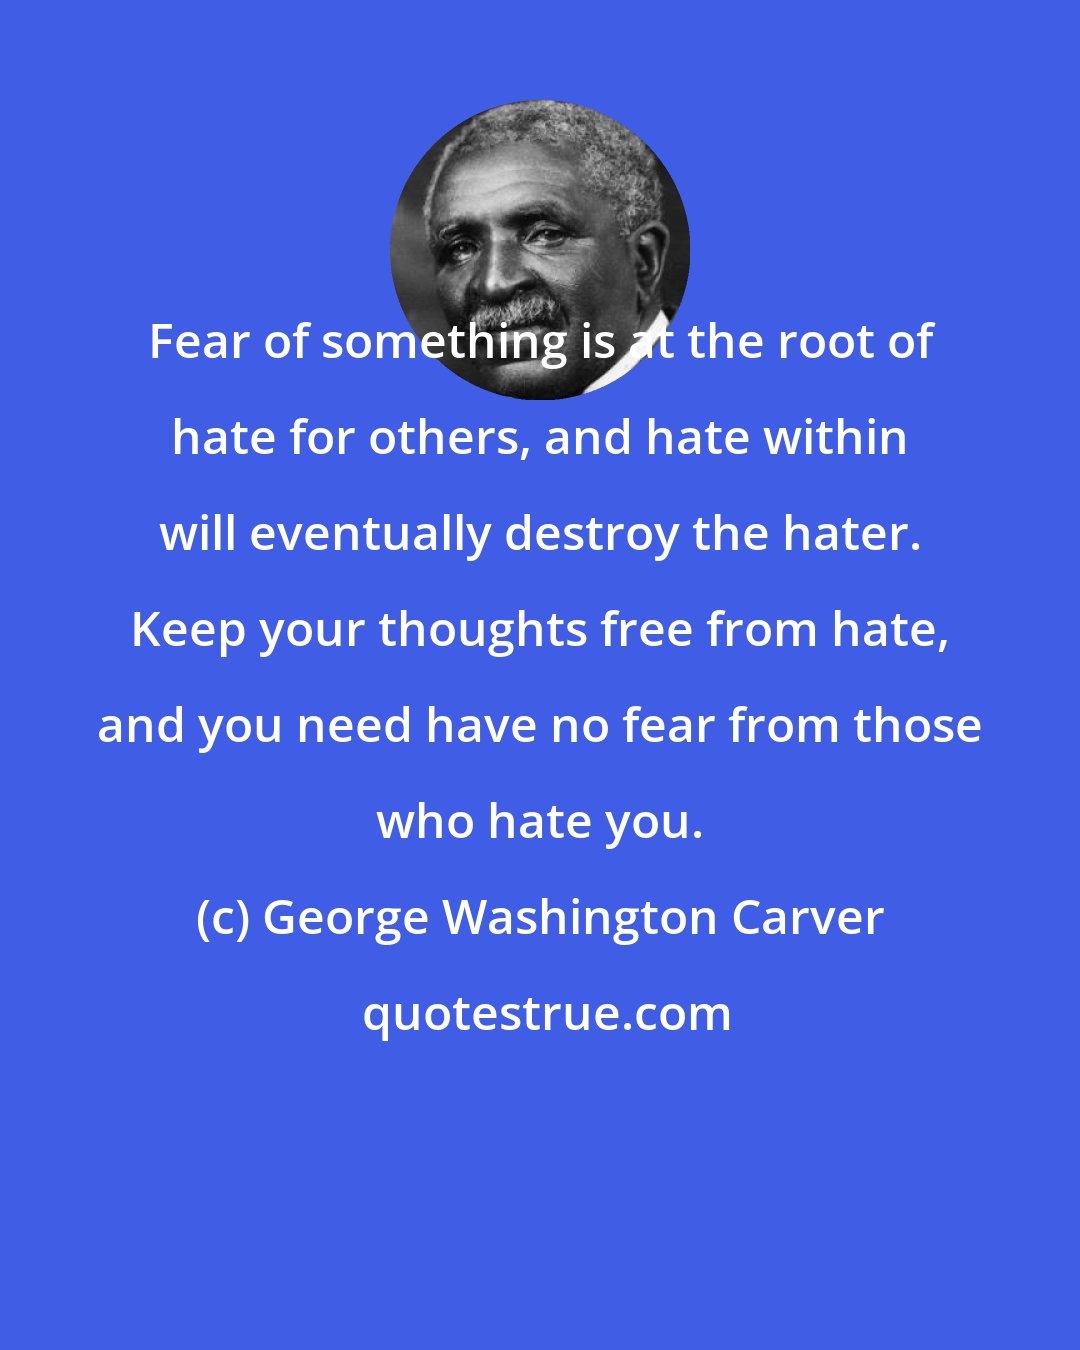 George Washington Carver: Fear of something is at the root of hate for others, and hate within will eventually destroy the hater. Keep your thoughts free from hate, and you need have no fear from those who hate you.